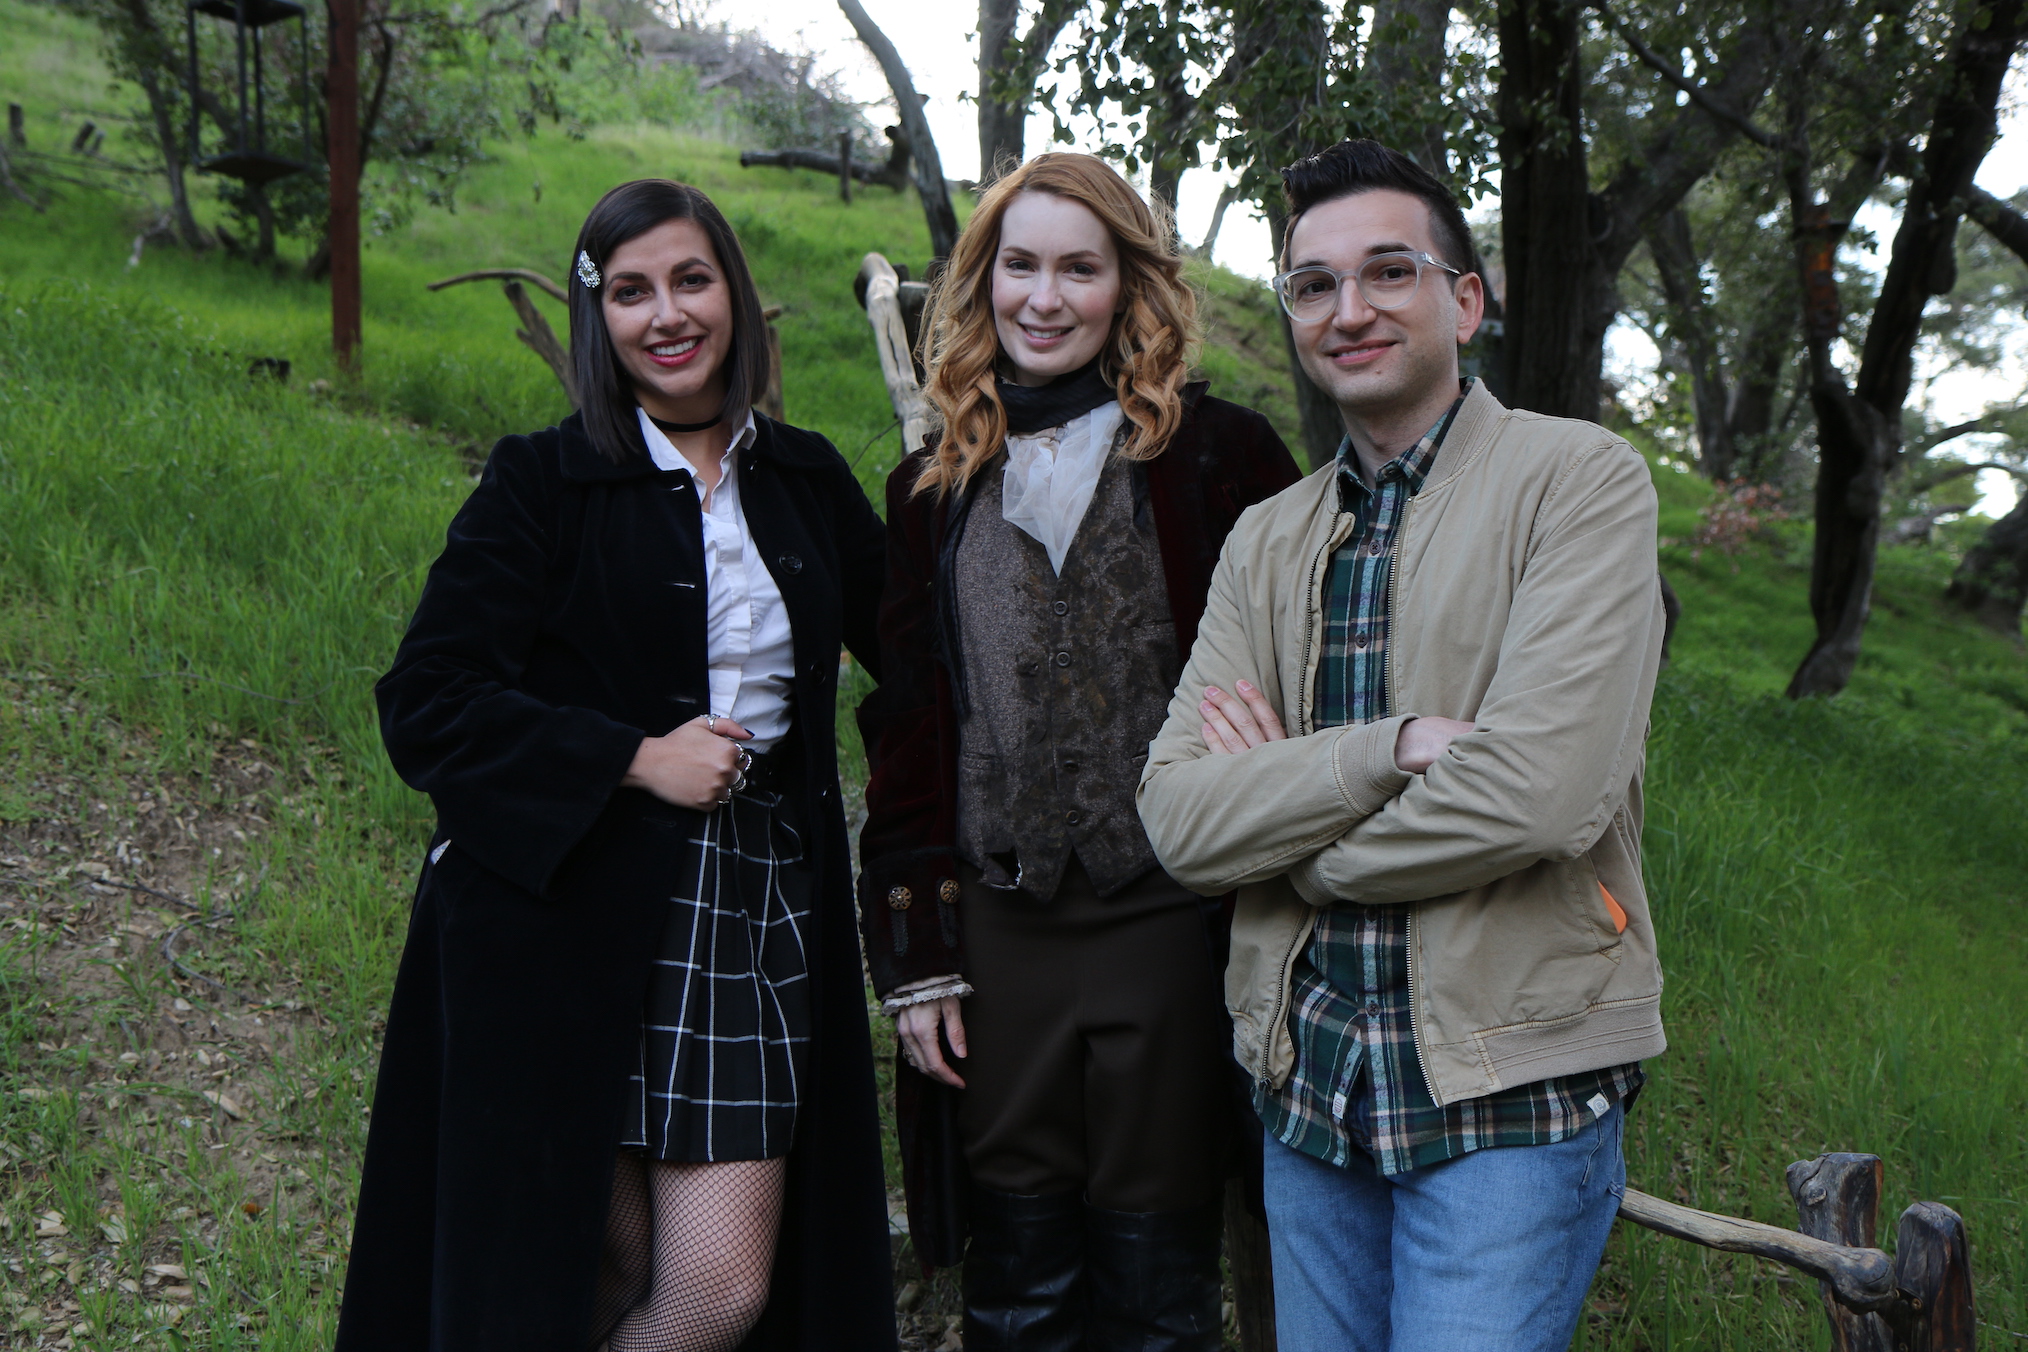 'Headless' creators Sean and Sinead Persaud with Felicia Day